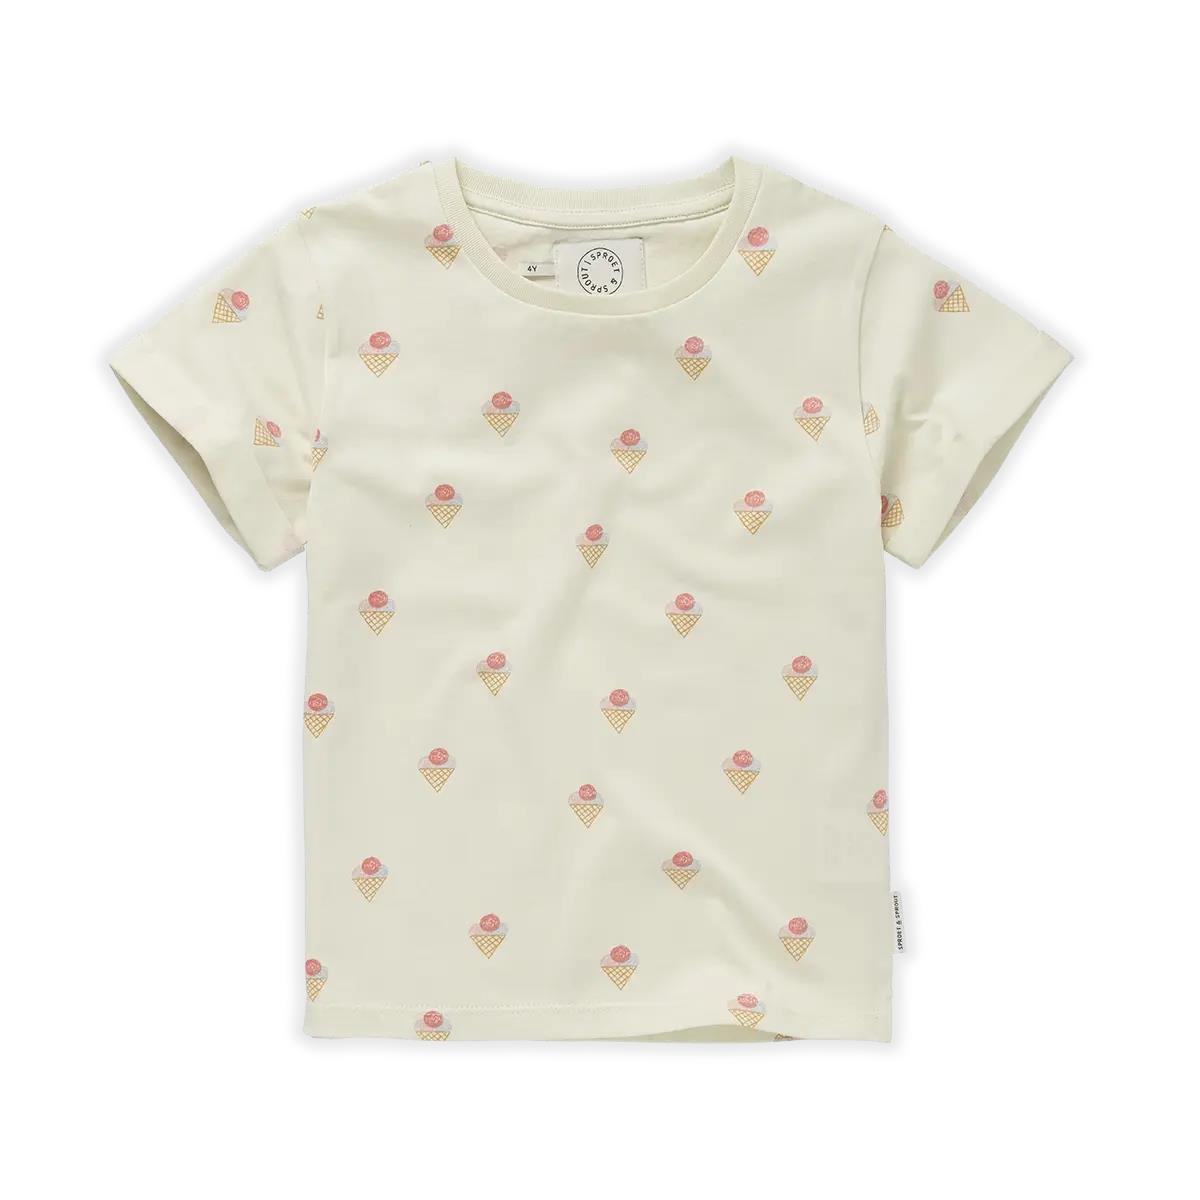 SPROET & SPROUT - T-shirt Ice Cream print